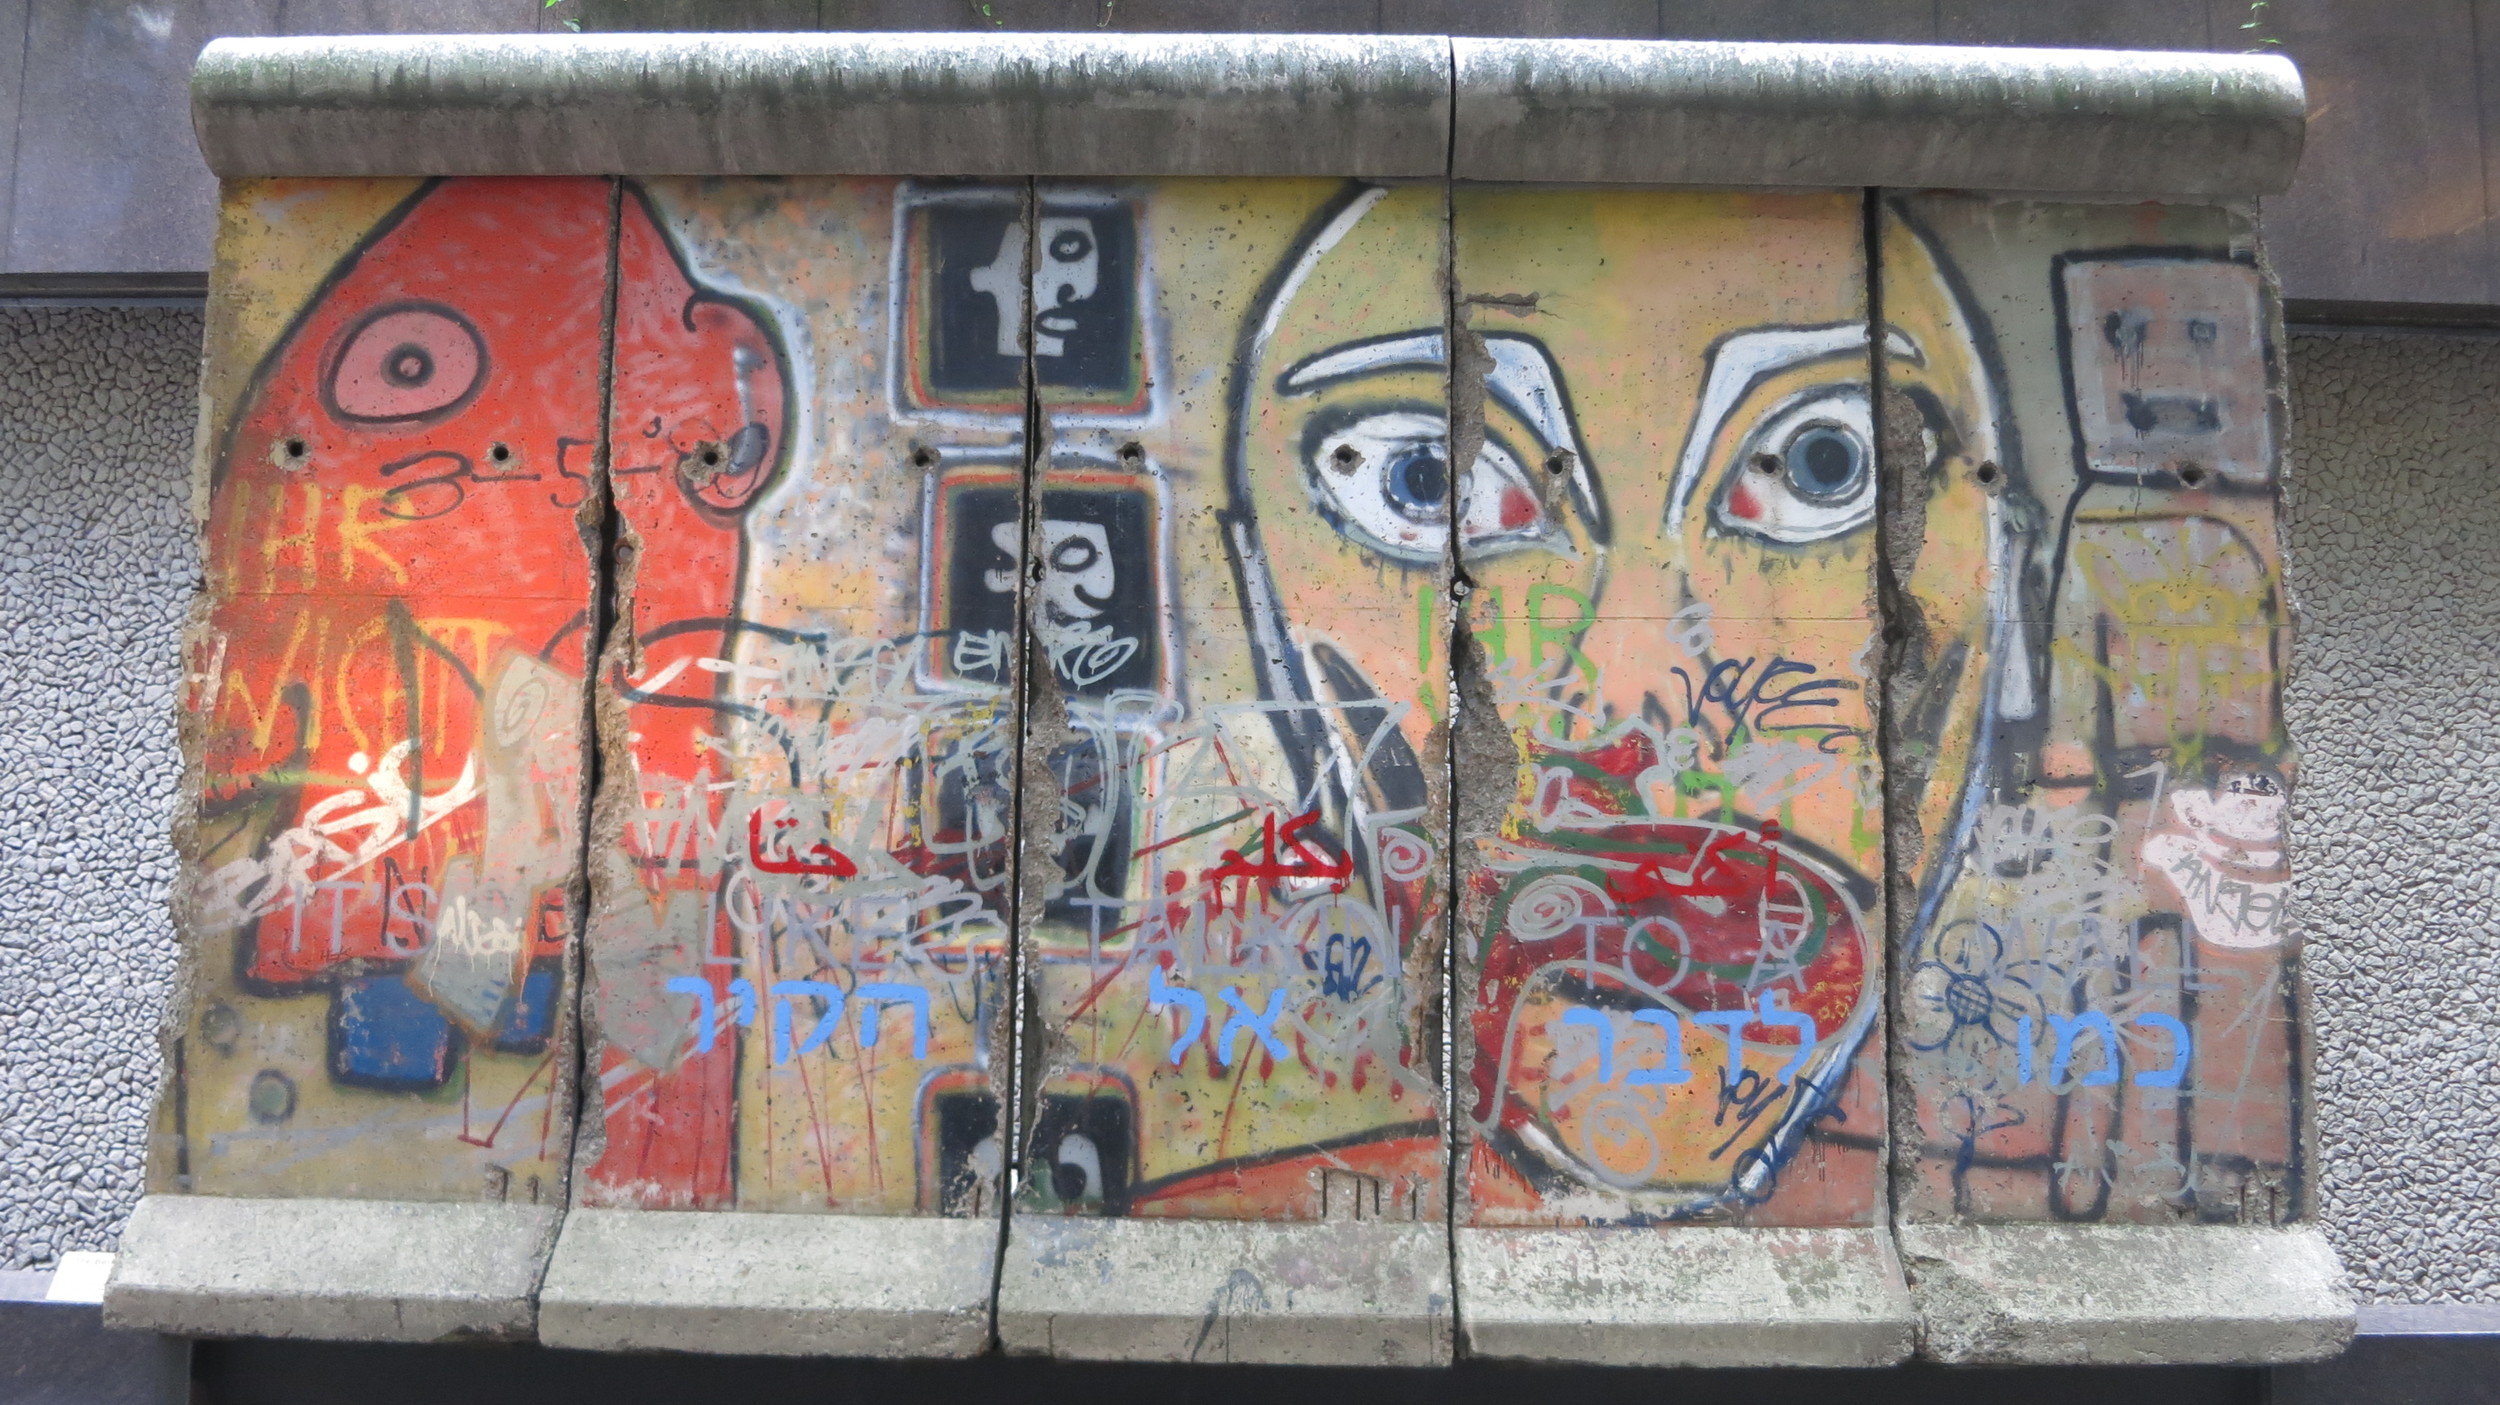  The mural after the 2014 graffiti vandalism. The words “IT’S LIKE TALKIN TO A WALL” were spray painted across the surface in three different languages and colors: Arabic in red, English in gray, and Hebrew in blue.&nbsp;  
  
 
  
    
  
 Normal 
 